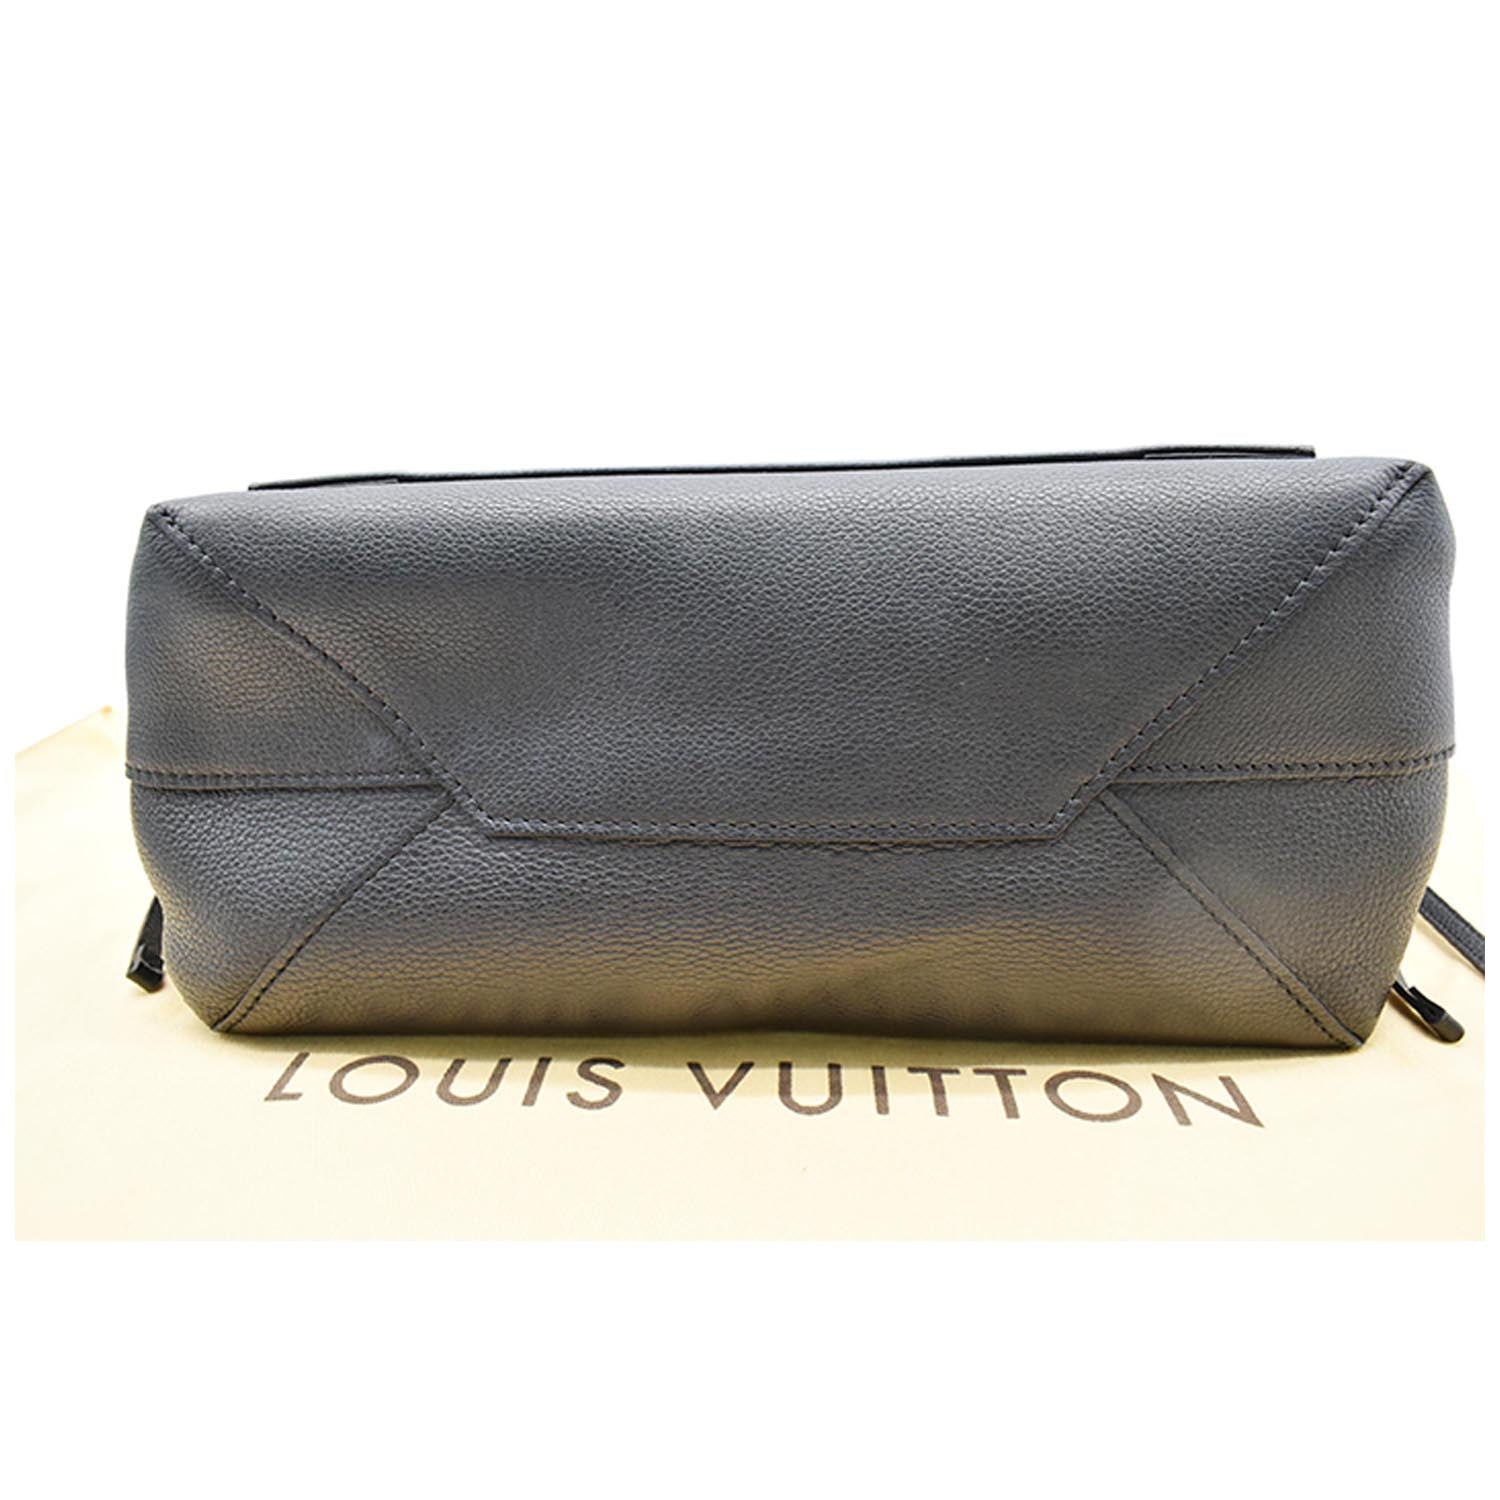 Leather satchel Louis Vuitton Black in Leather - 31055244